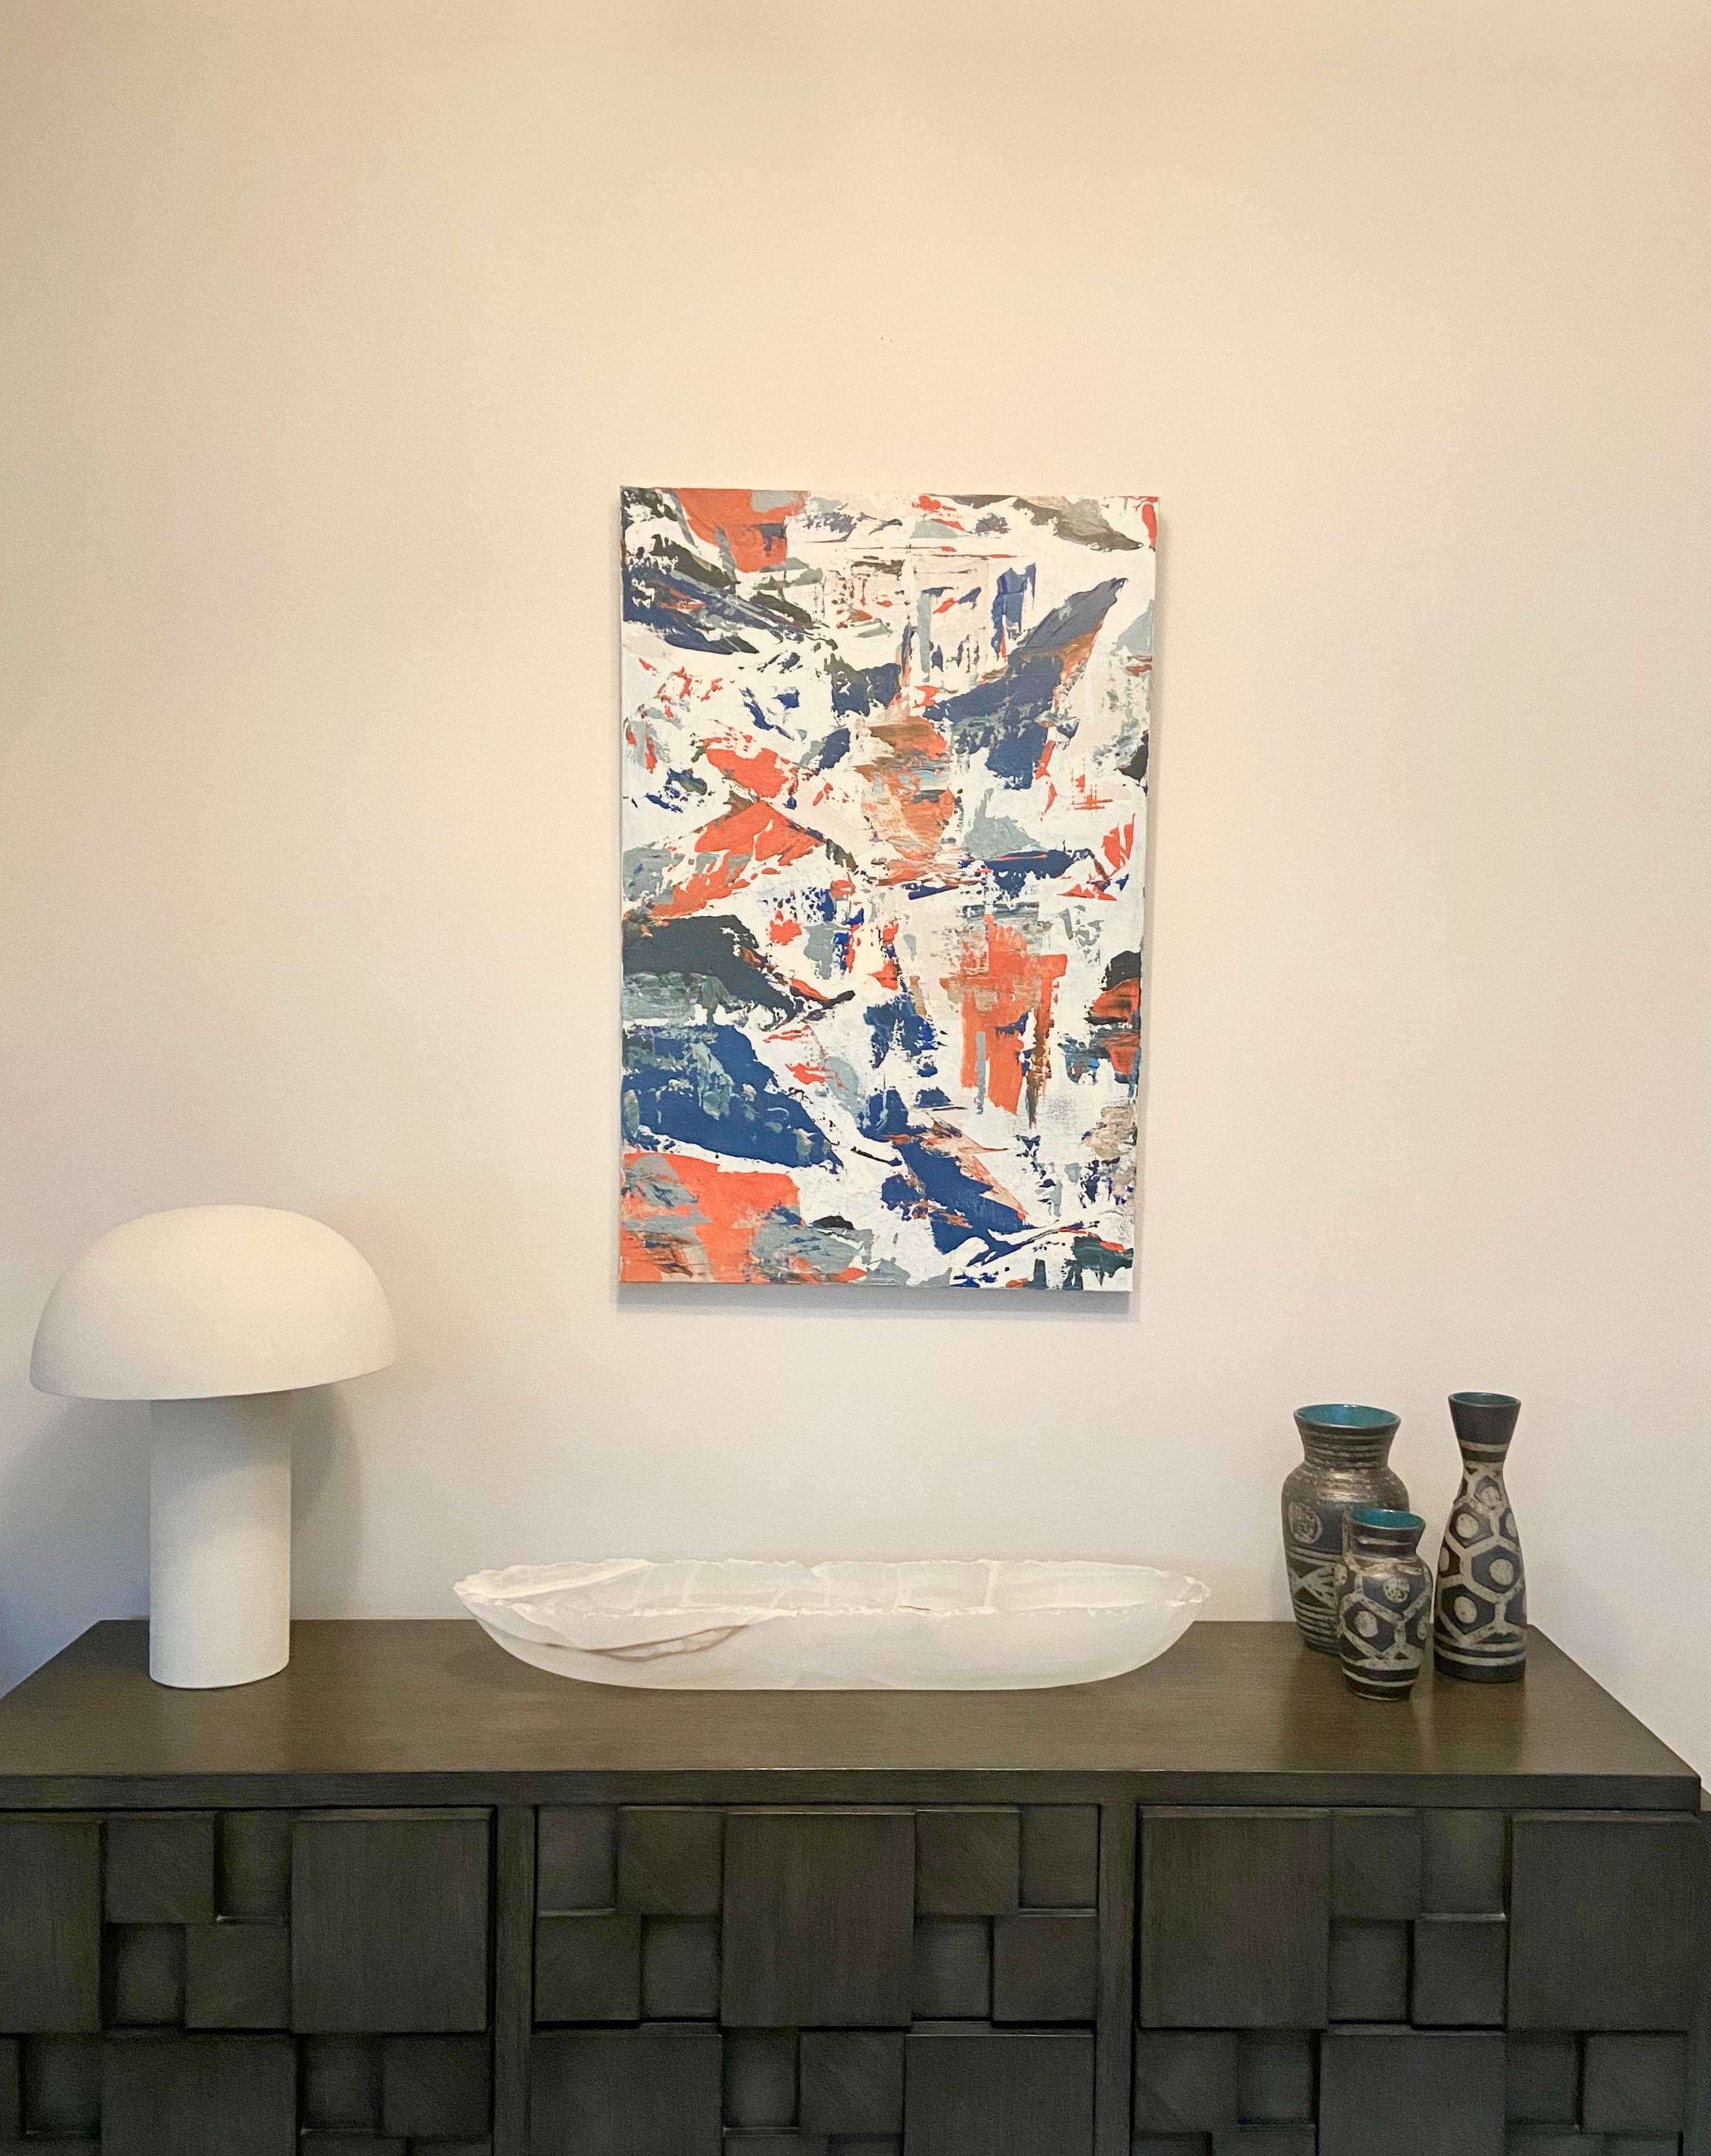 The blue depth of the sky and the bright orange of the earth blend together in an abstract, dense composition by artist Lana Sexton. Inspired by the desert landscape, this painting seeks to capture the essence and energy of nature. The intricate and